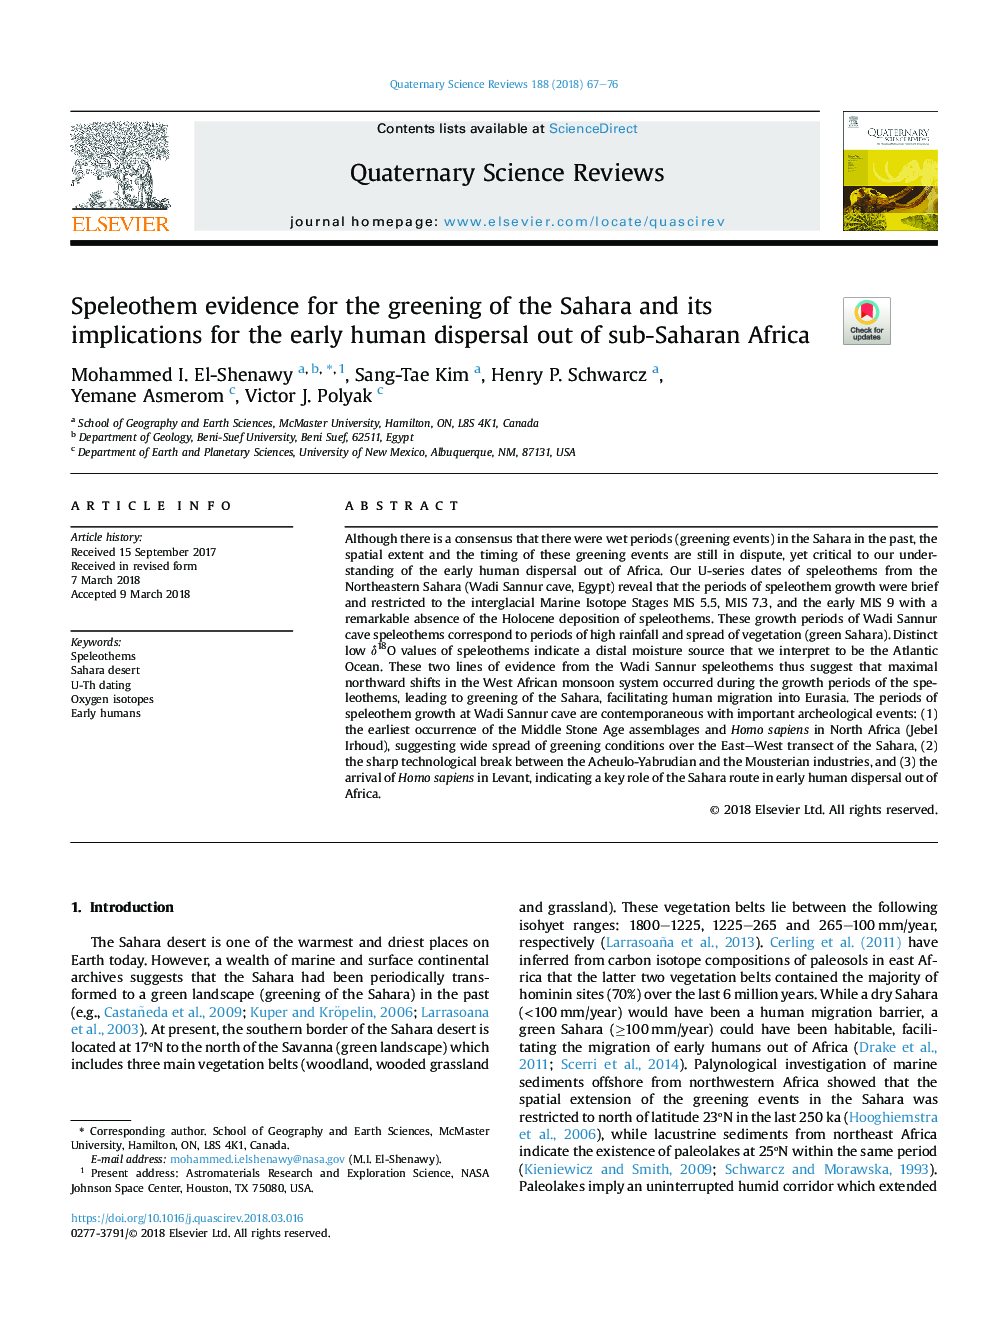 Speleothem evidence for the greening of the Sahara and its implications for the early human dispersal out of sub-Saharan Africa